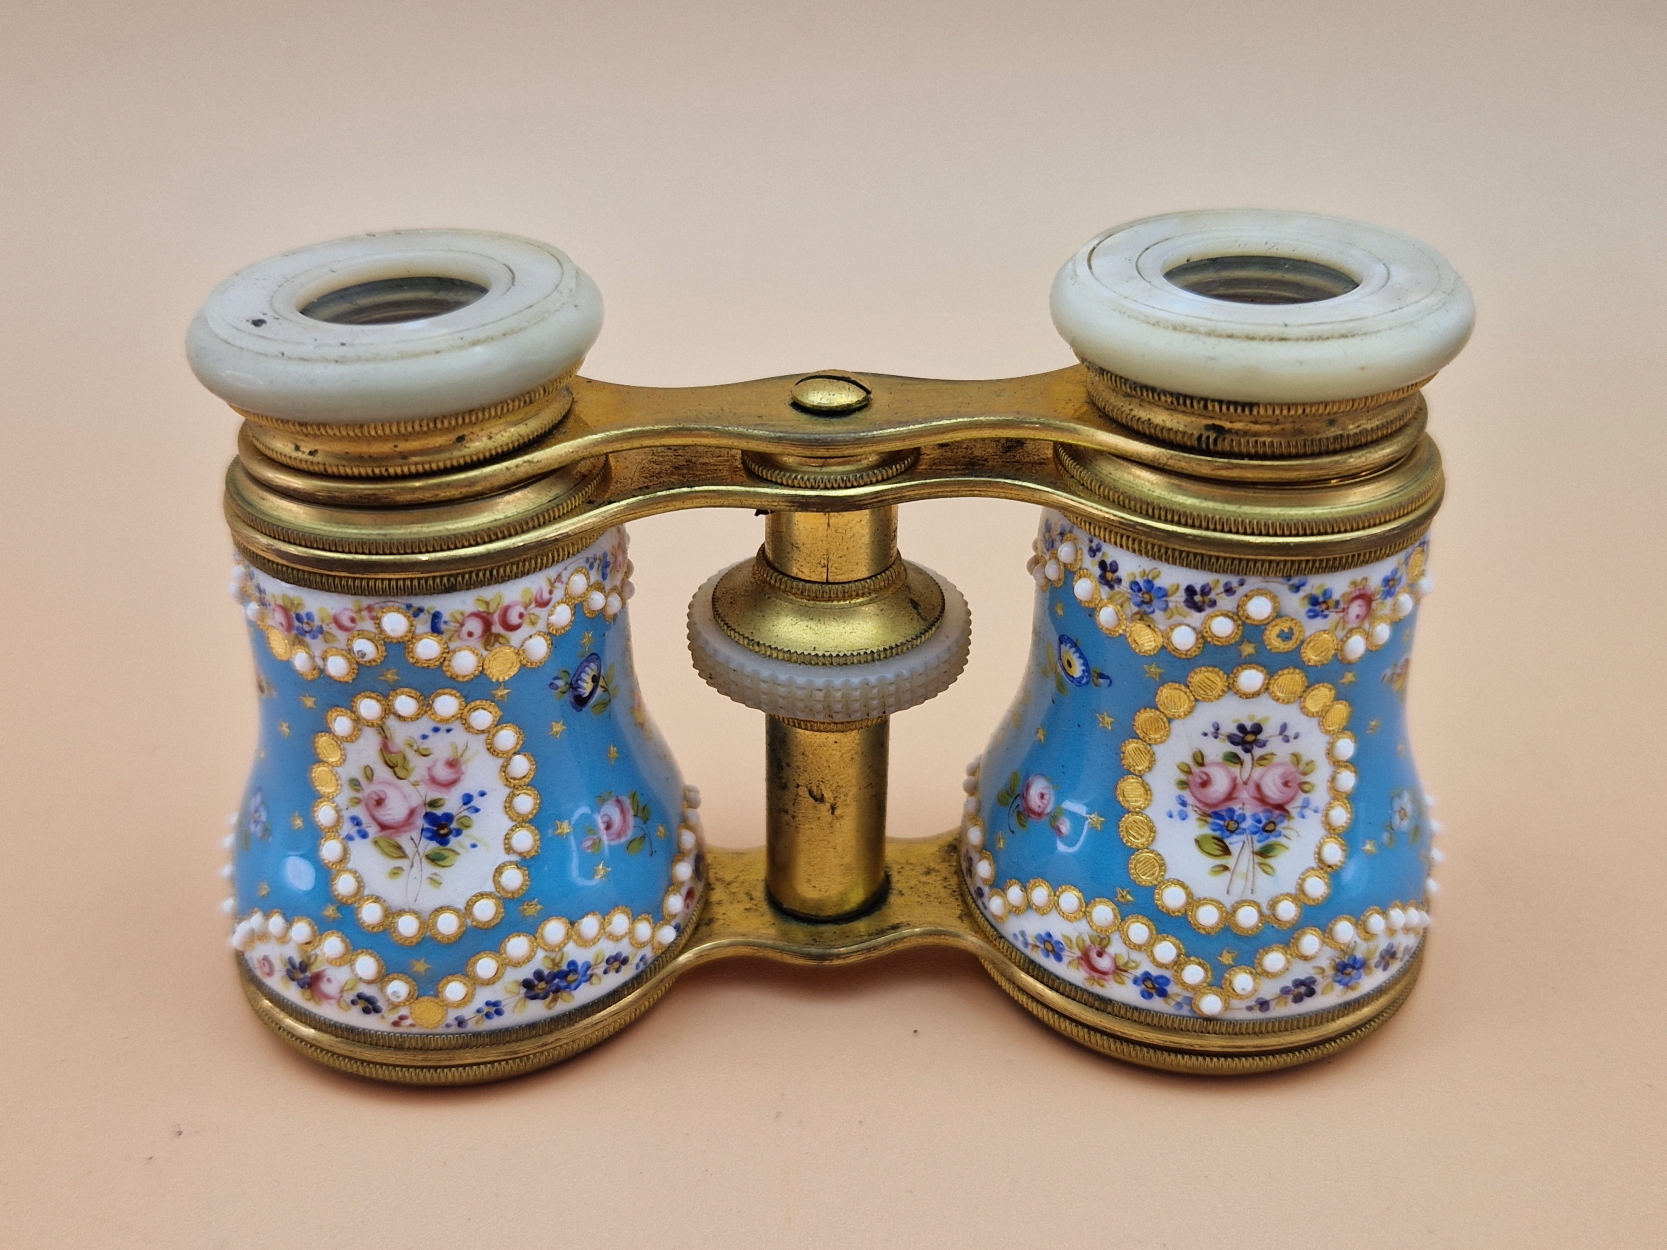 A LEATHER CASED PAIR OF OPERA GLASSES WITH JEWELLED AND FLOWER PAINTED BLUE GROUND ENAMEL BARRELS